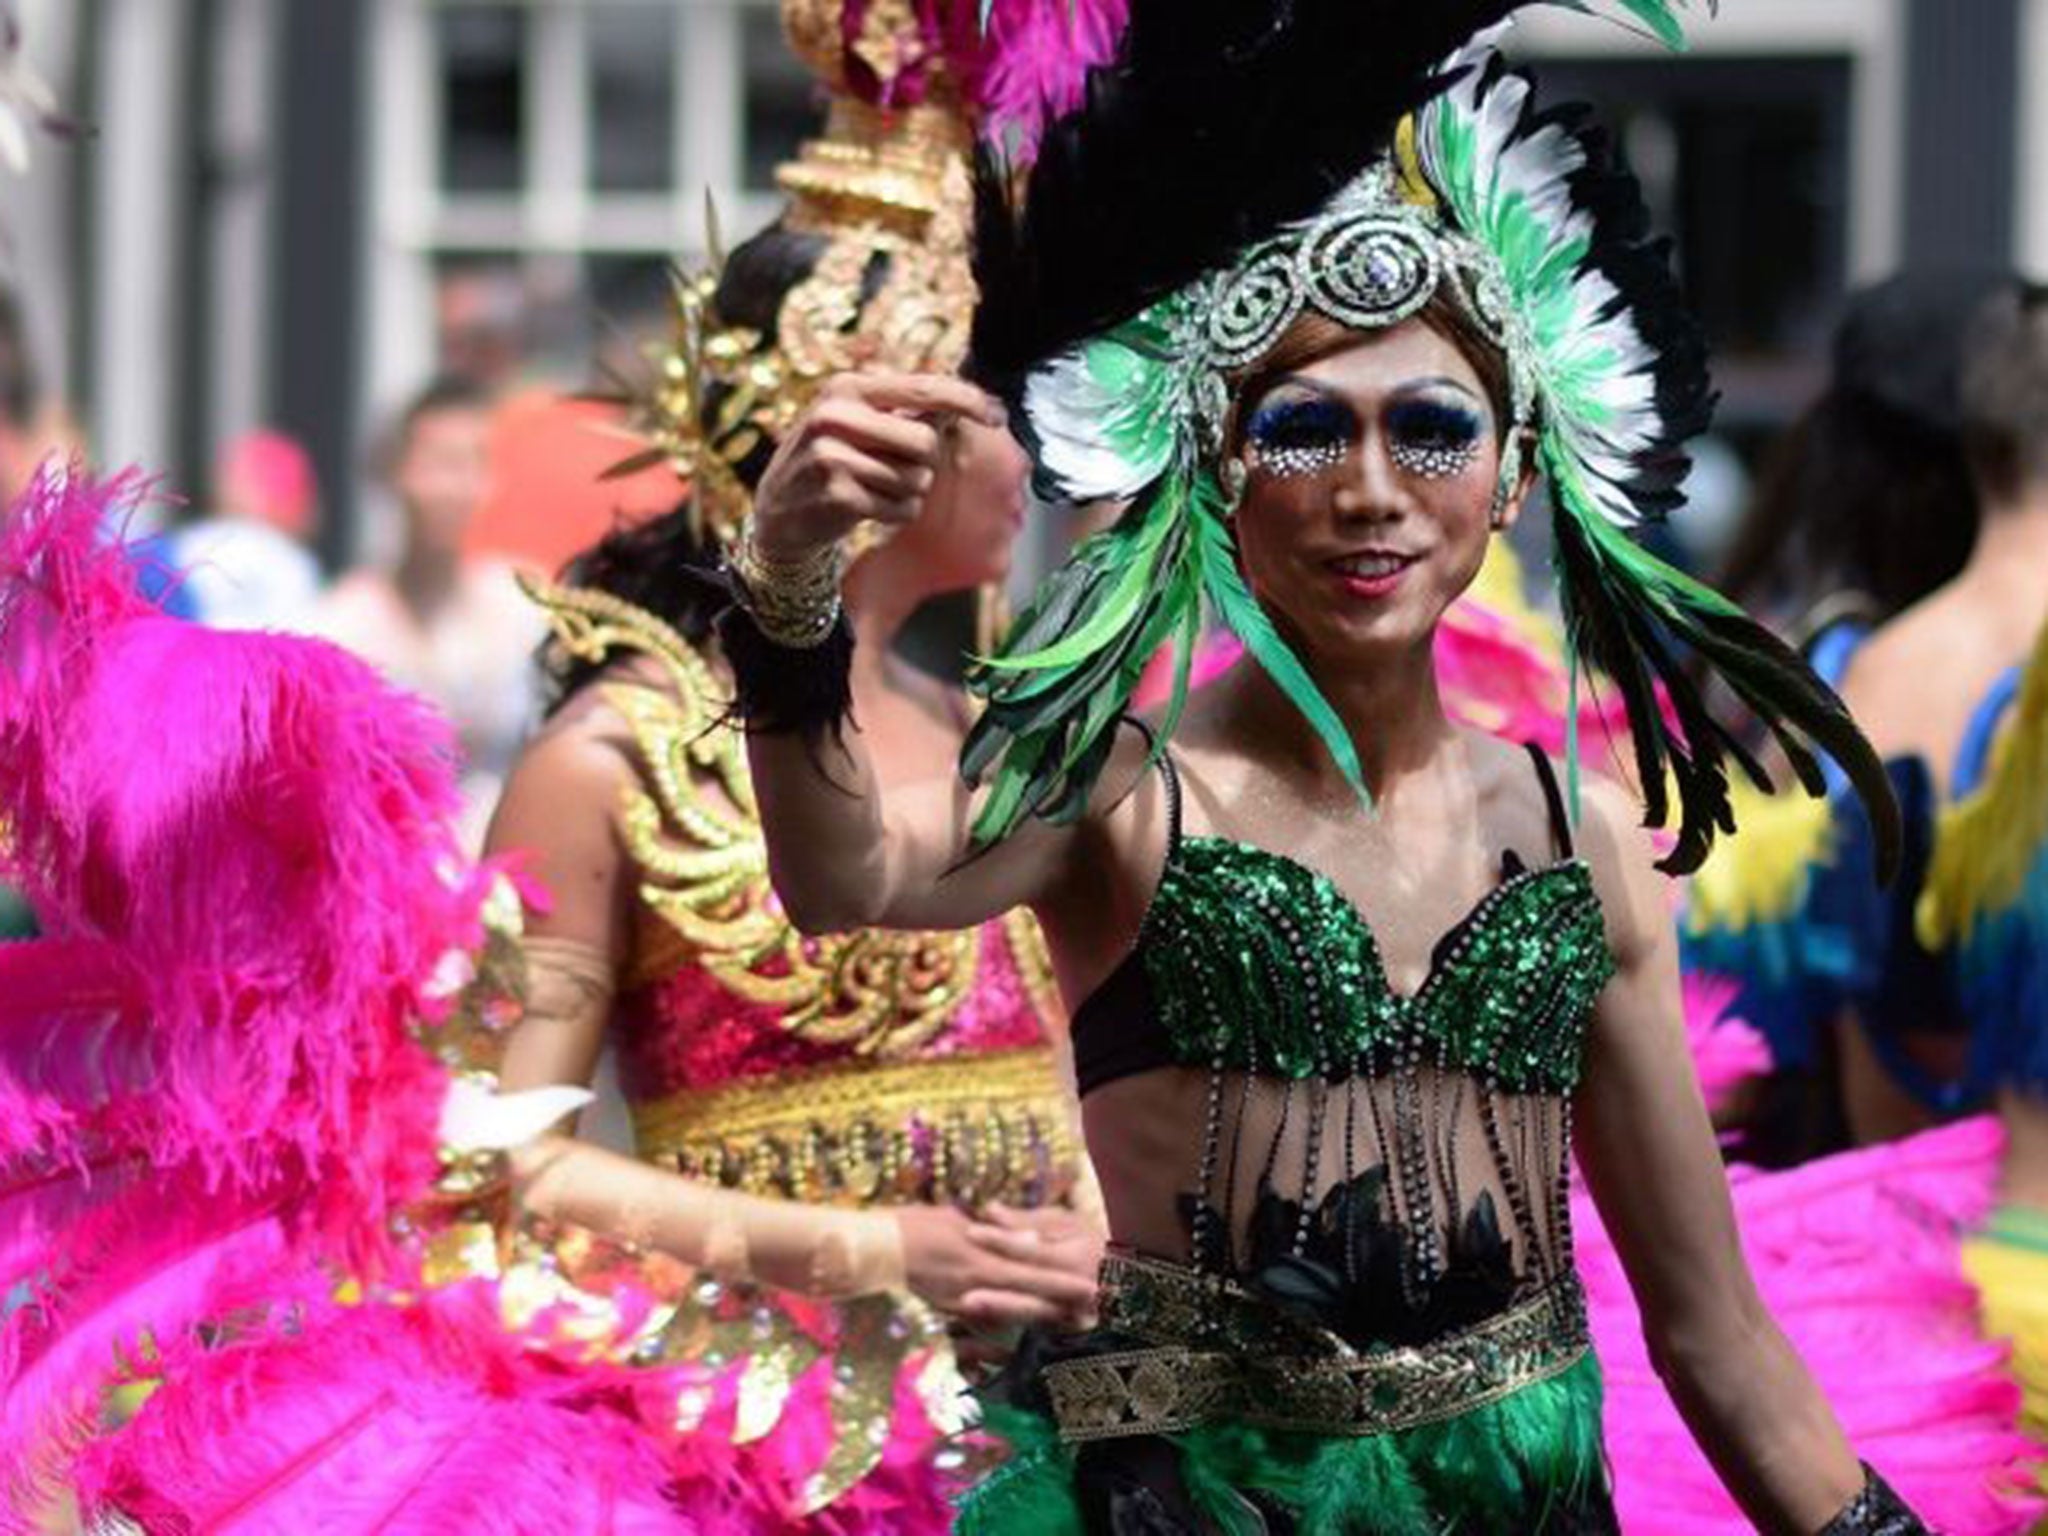 Revellers take part in the London Pride Parade 2014 in central London